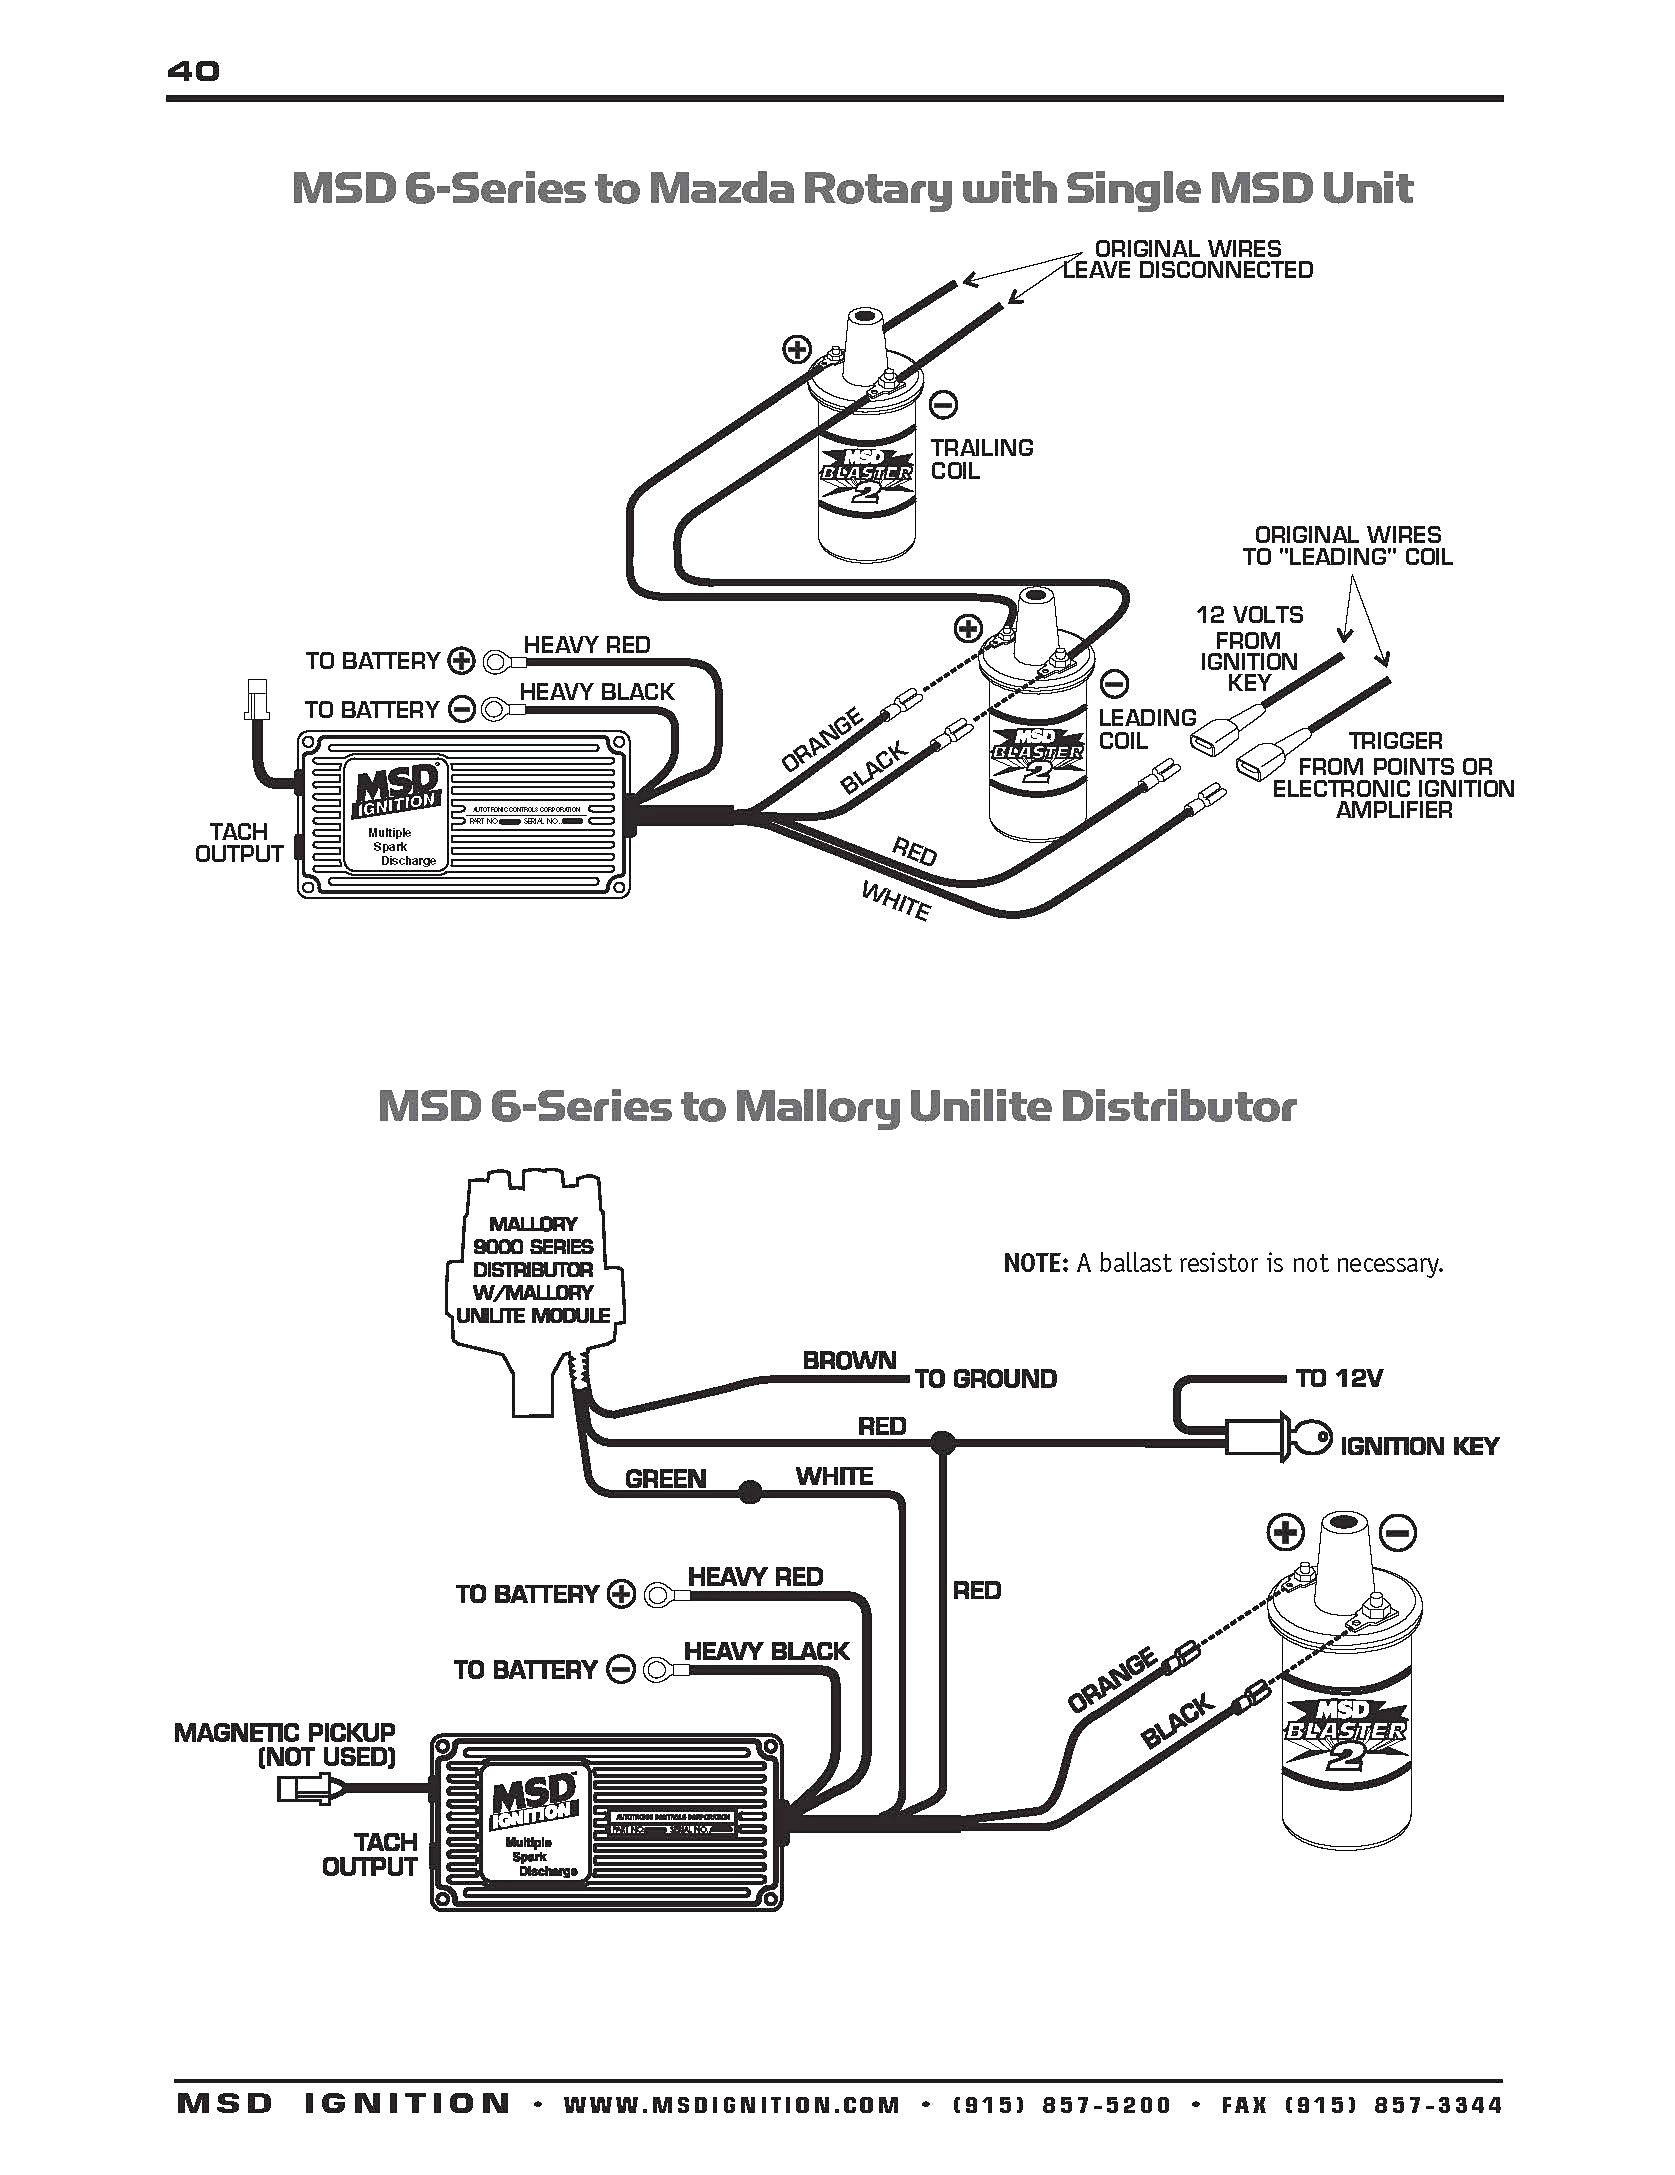 Mallory Ignition Wiring Diagram | Wiring Diagram Image